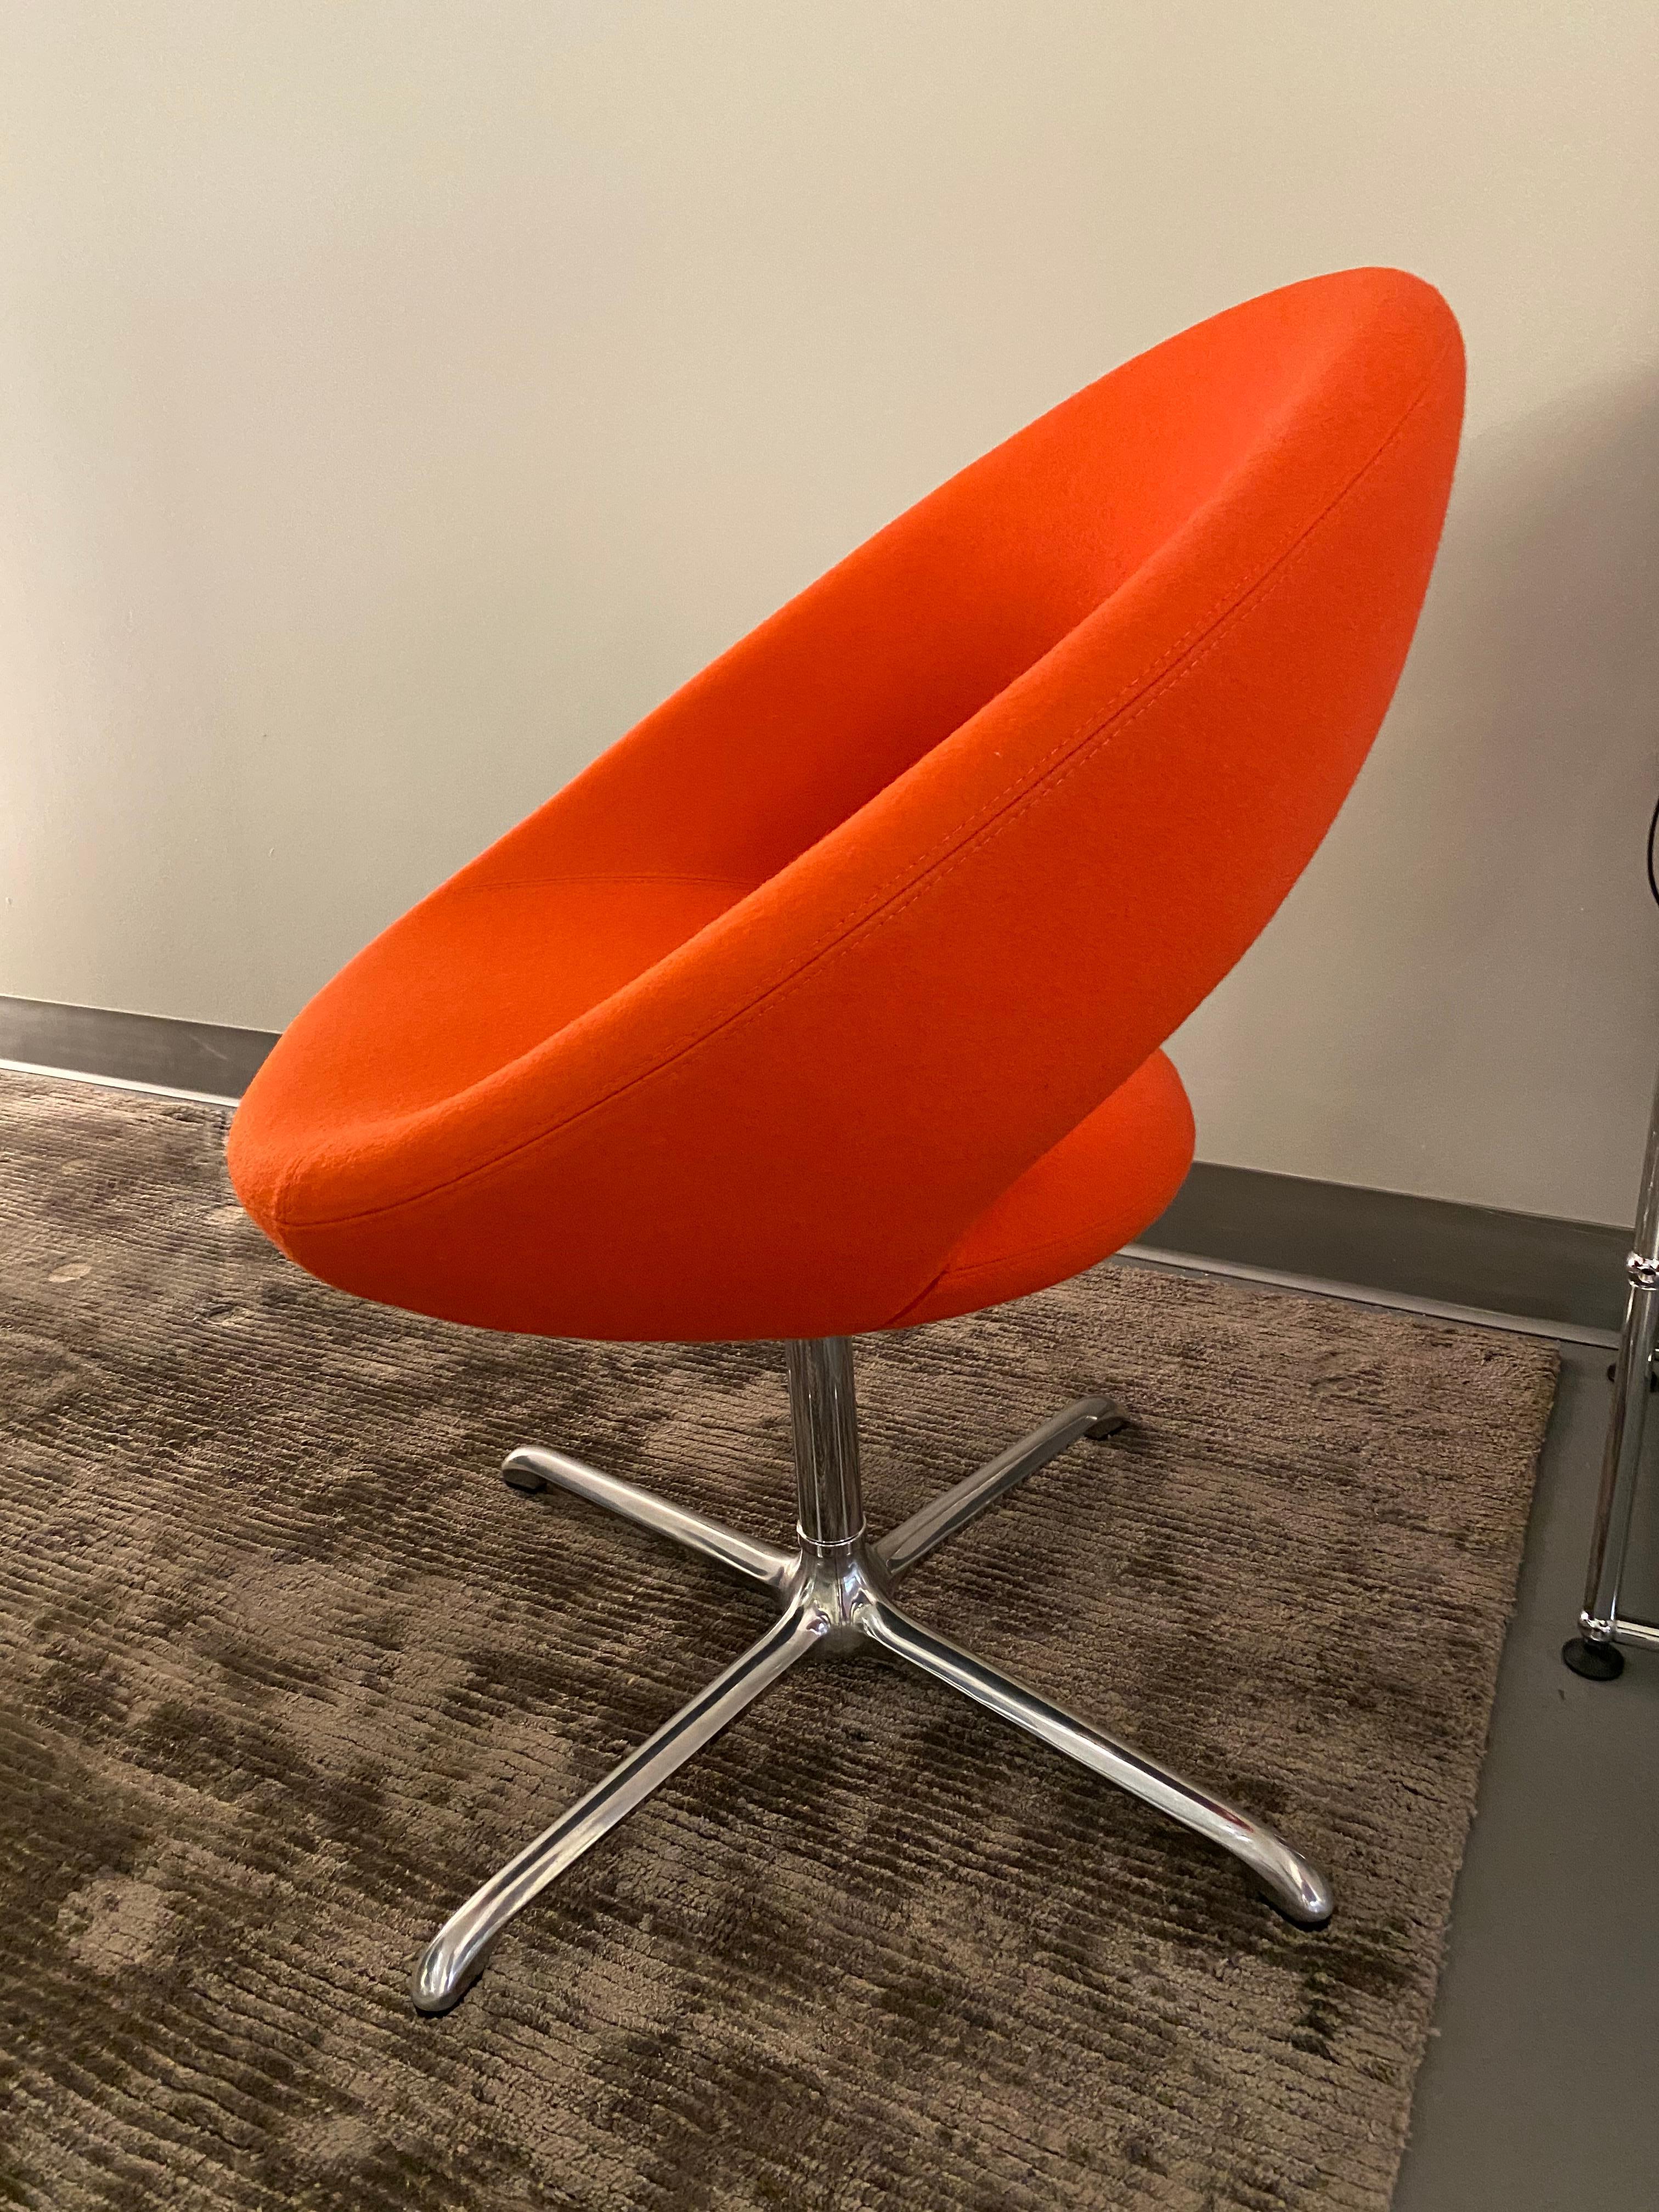 A contemporary, luxurious design. Elegant and comfortable. For meeting rooms and dining rooms. The rounded, well-fitted back makes the chair comfortable as active seating or in a more relaxed position. 
Cross base swivel w auto return mechanism